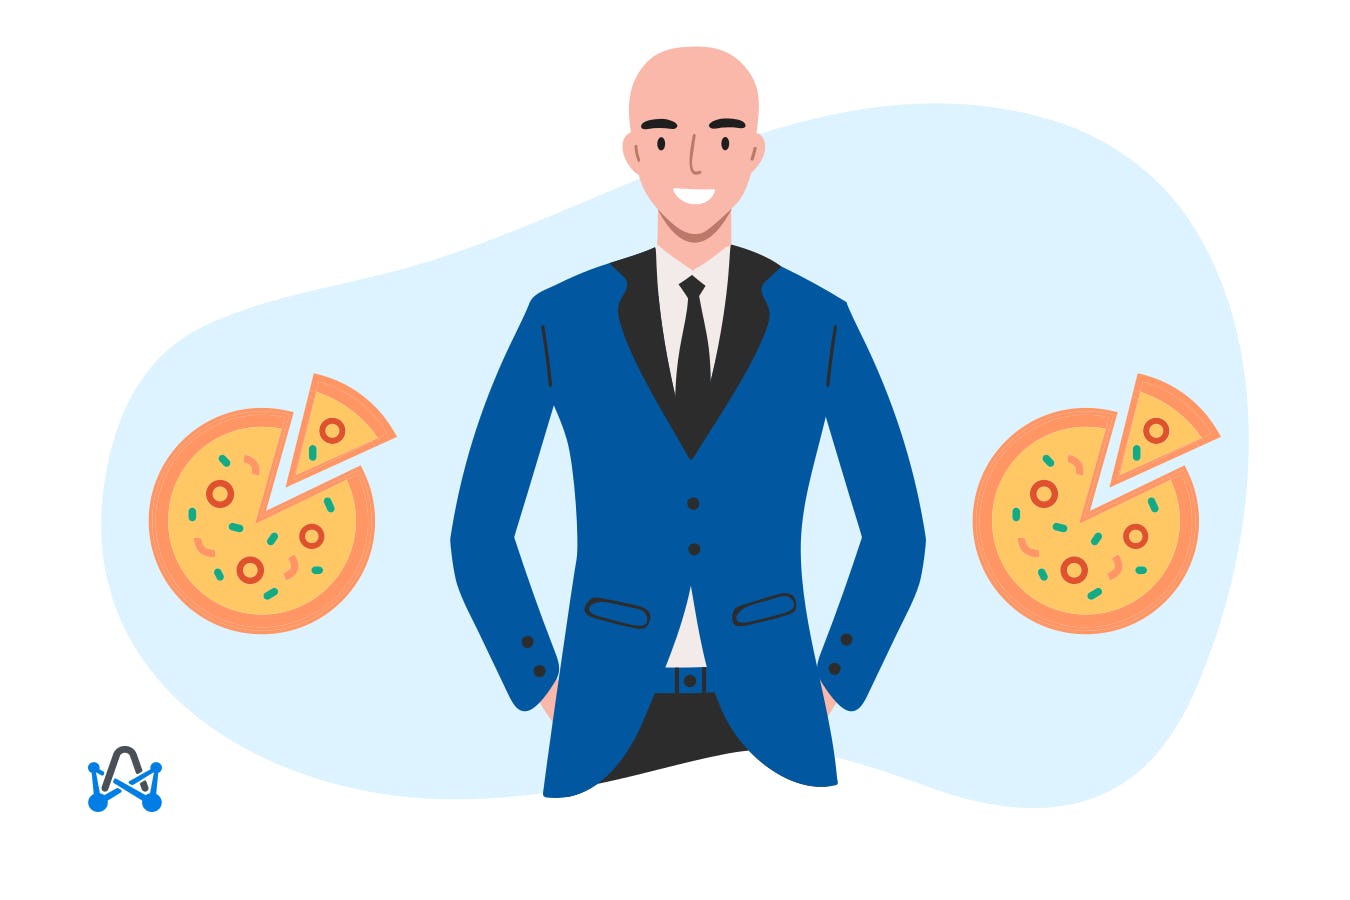 Jeff Bezos' Two Pizza Rule: What To Do When It Doesn't Apply